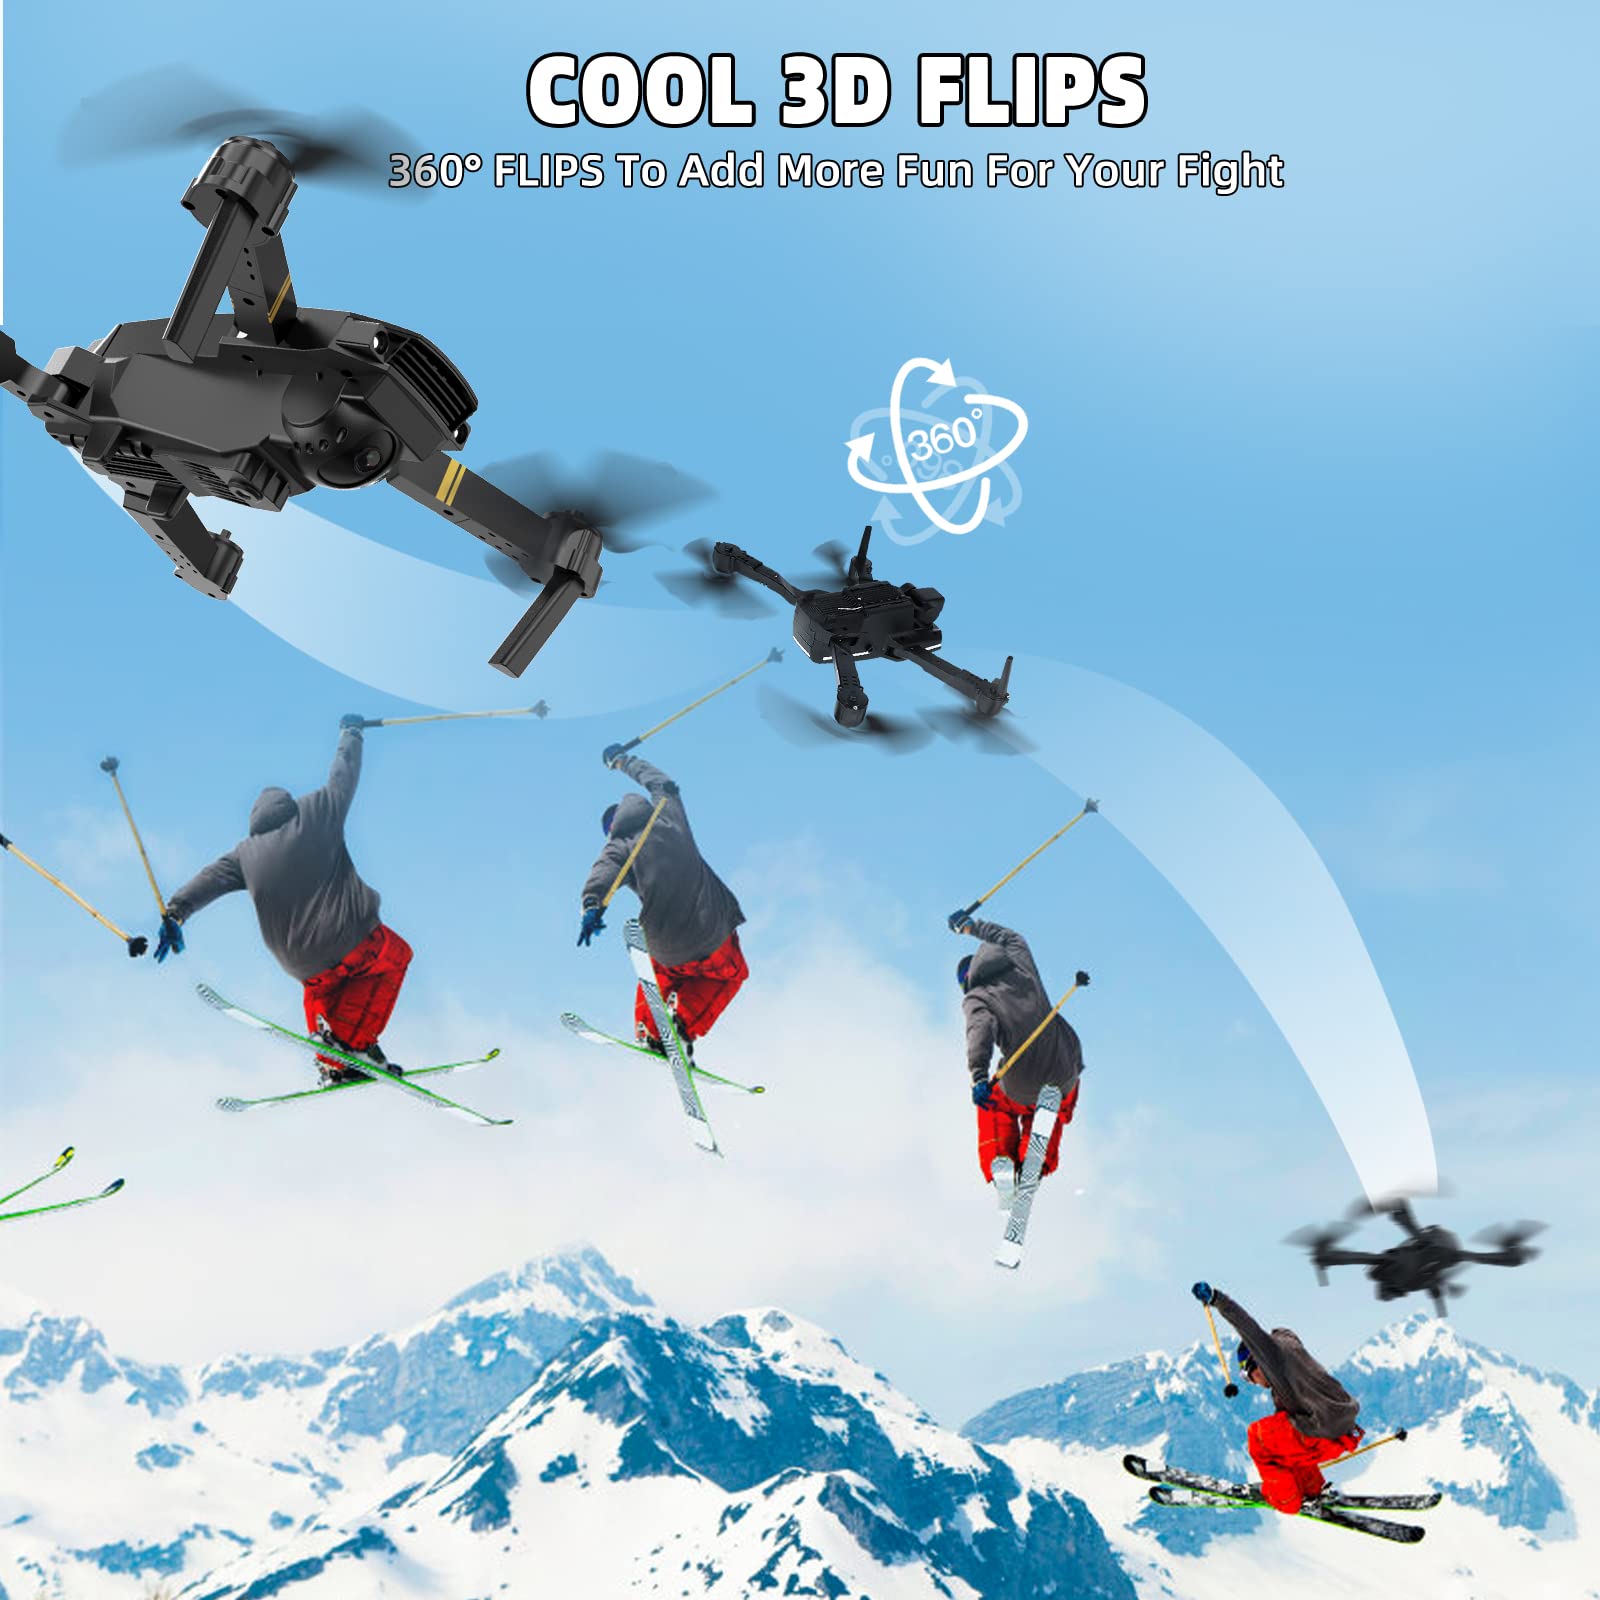 Drones for Adults with Cameras 4K, Drone with Camera 4k 1080 Foldable Drones for kids RC Quadcopter, Altitude Hold, FPV Drone Live Video, One Key Take Off, 3D Flip, Easter Gifts Toys for Girls/Boys, 3 Batteries